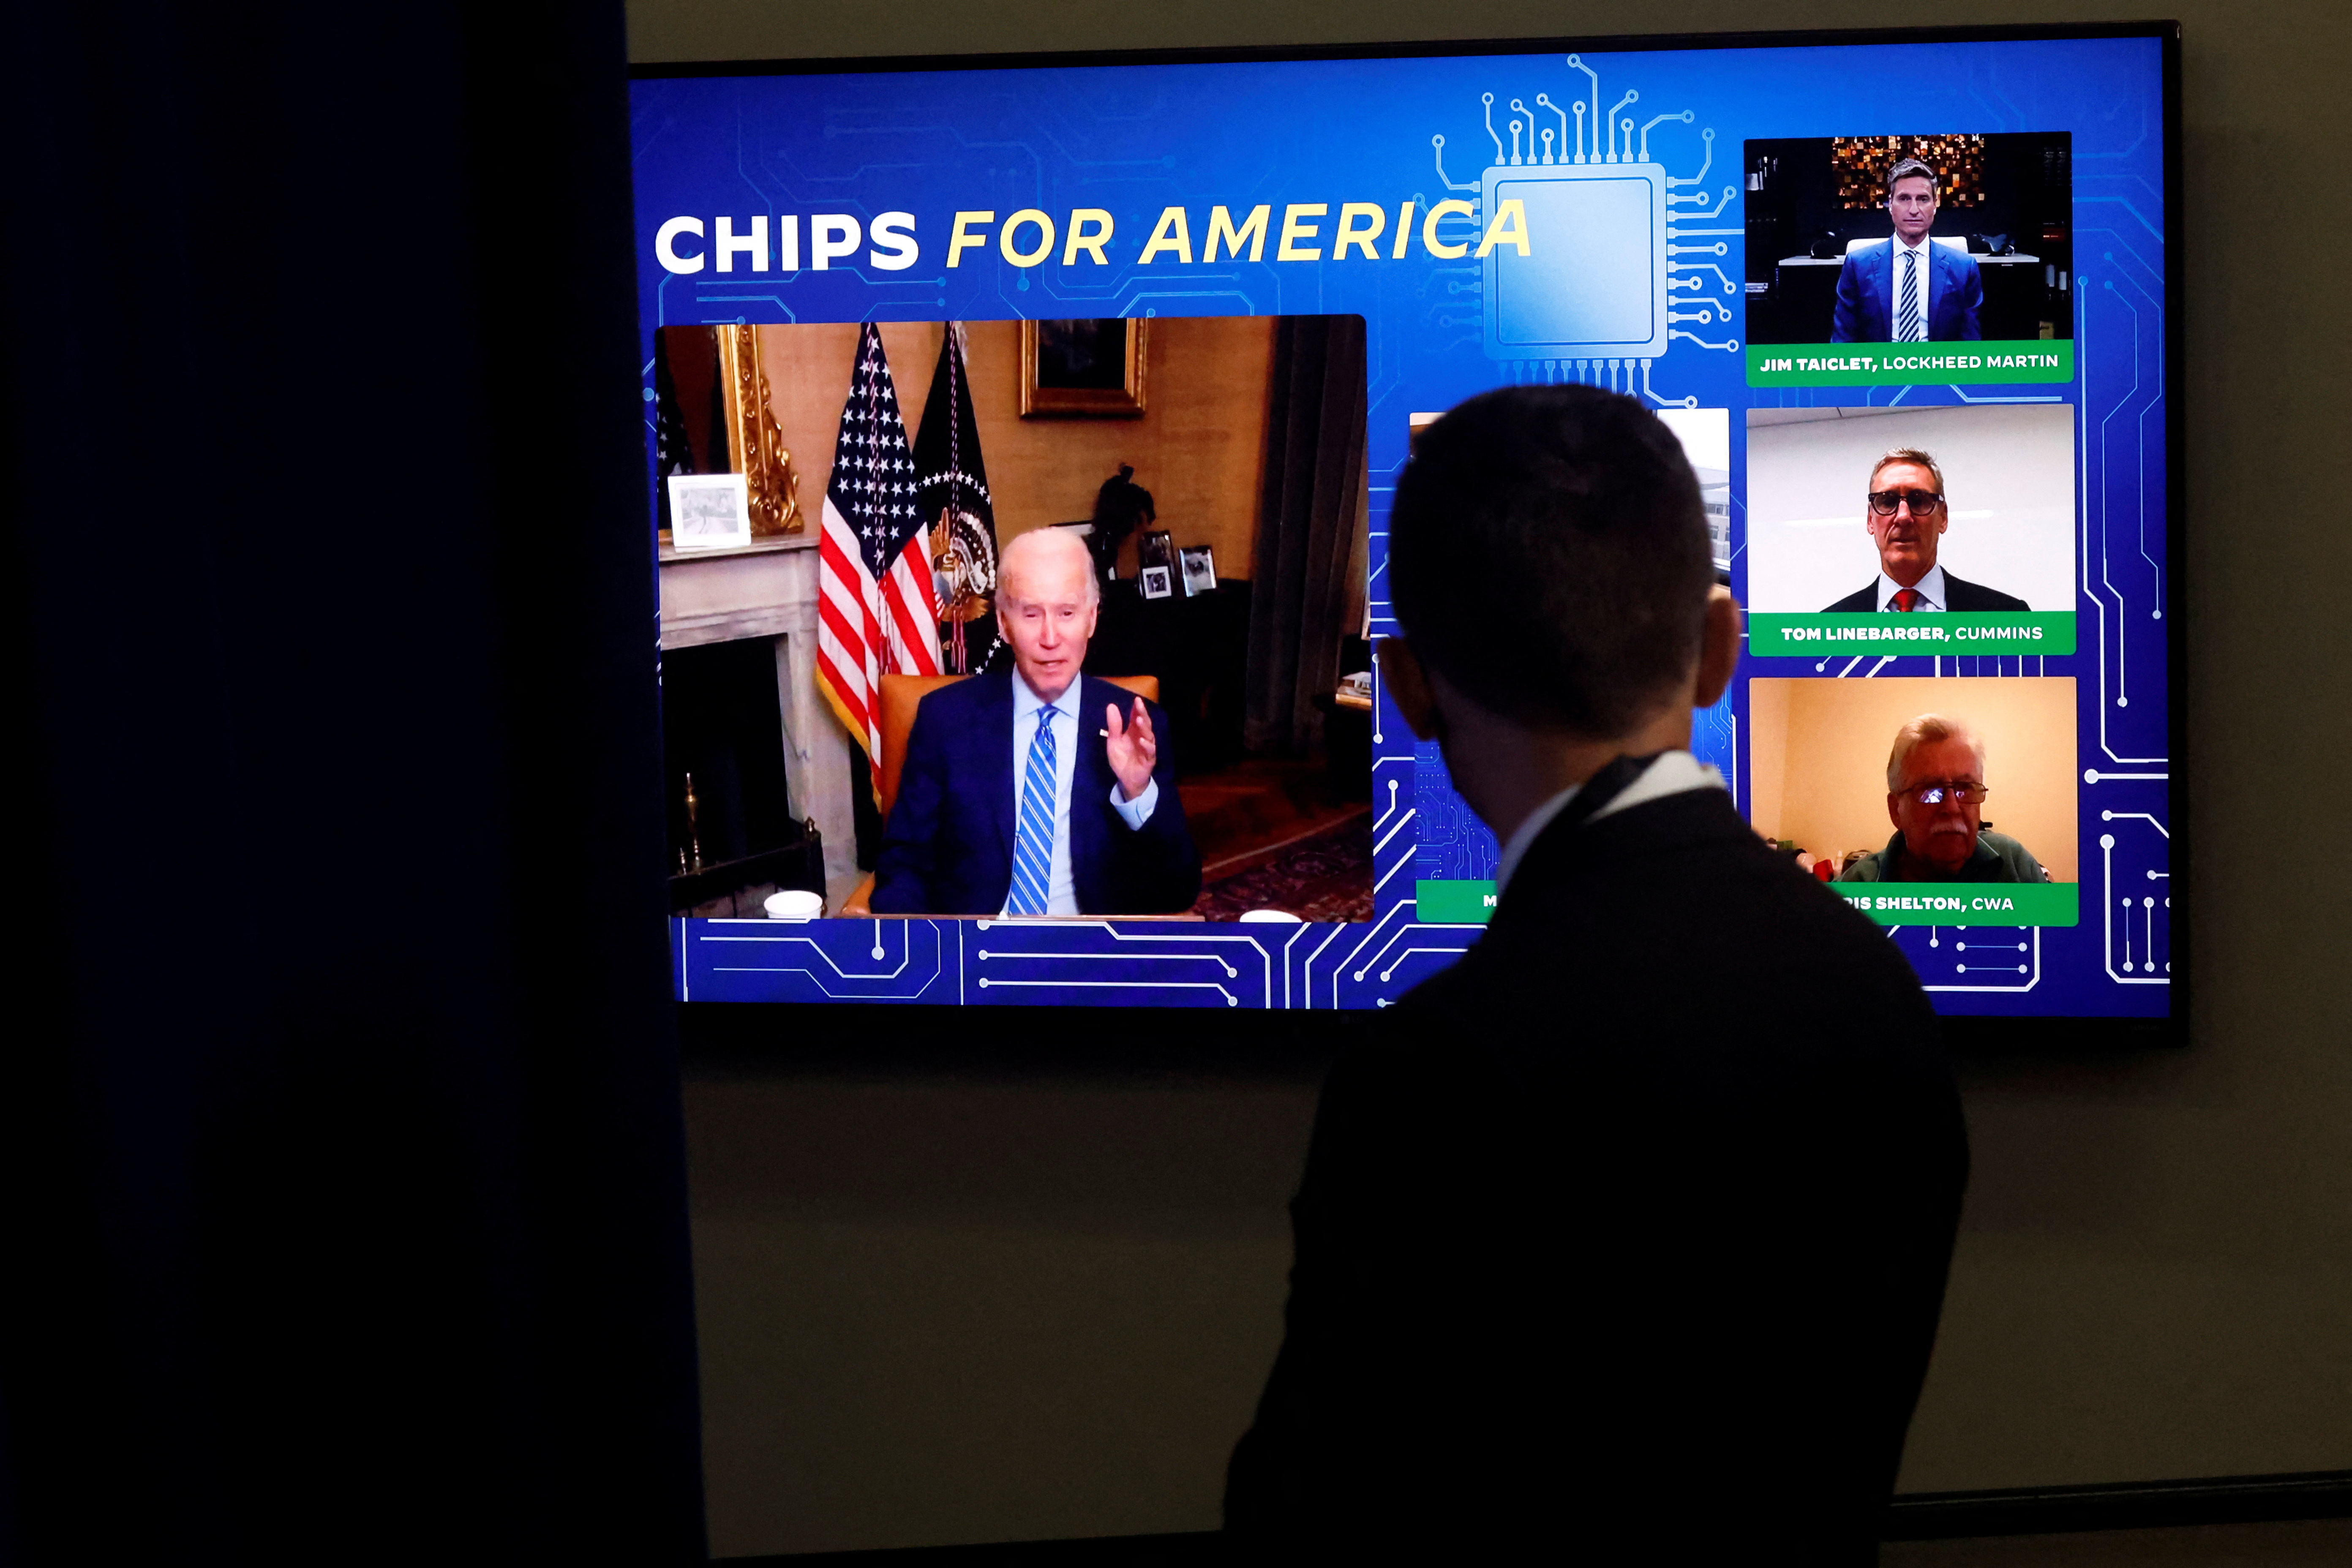 U.S. President Biden's virtual meeting with business and labor leaders about the Chips Act in Washington